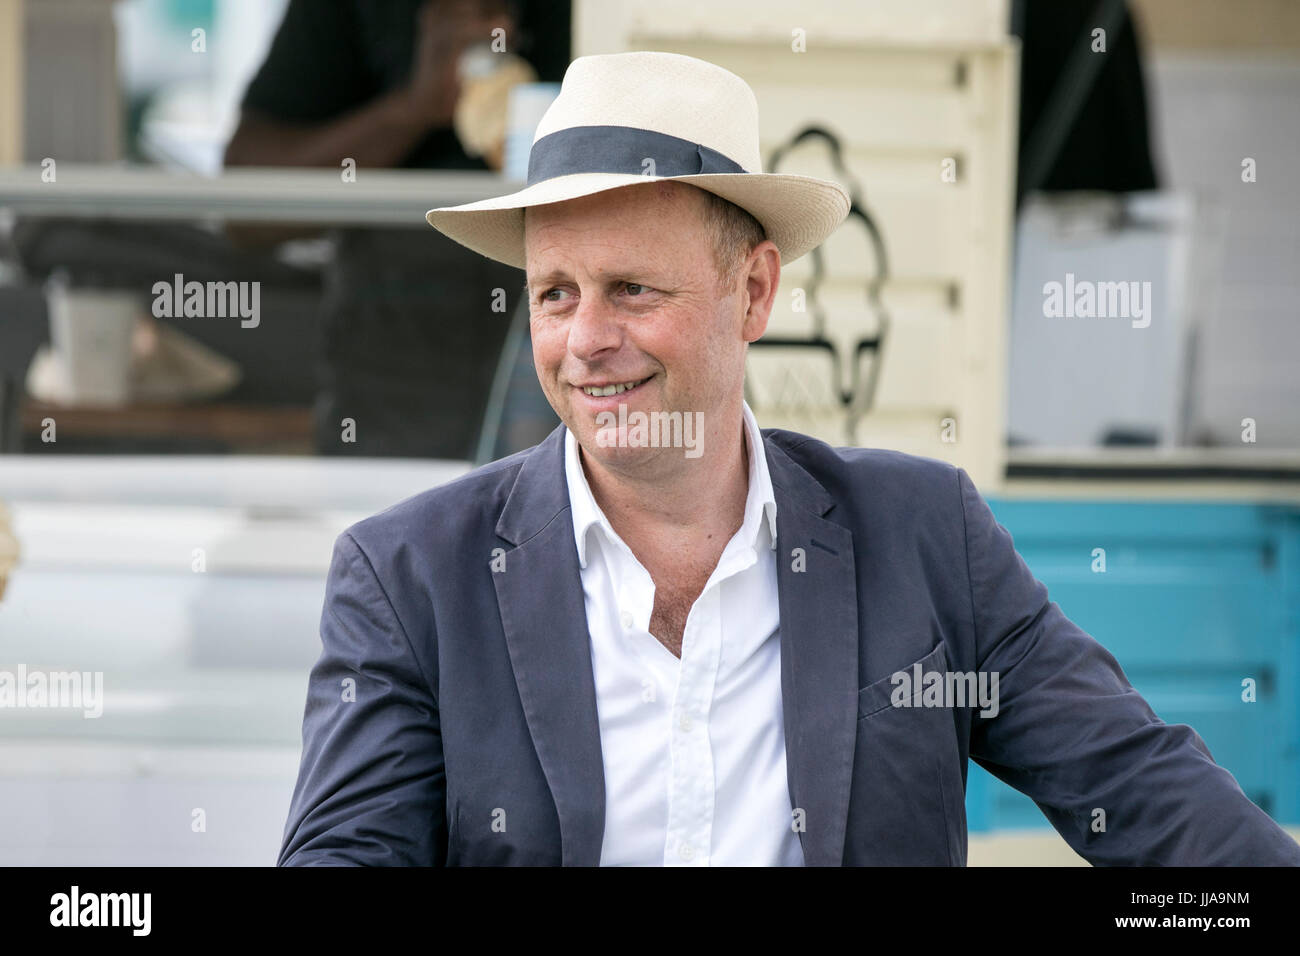 RHS Tatton Park Flower Show, Knutsford, Cheshire. 19th July 2017. Famous celebrity gardener 'Joe Swift' spotted as the gates open on this years floral masterclass at the Royal Horticultural Society's Tatton Park Flower Show 2017. Keen gardeners can immerse themselves in the beauty, fragrance and colour of the Floral Marquee & Plant Village. A new addition to the spectacular gardens on display is the 'Butterfly Dome' where guests can wander through the tropical paradise filled with exotic butterflies. Joseph Samuel Swift is an English garden designer, journalist and television presenter. Stock Photo